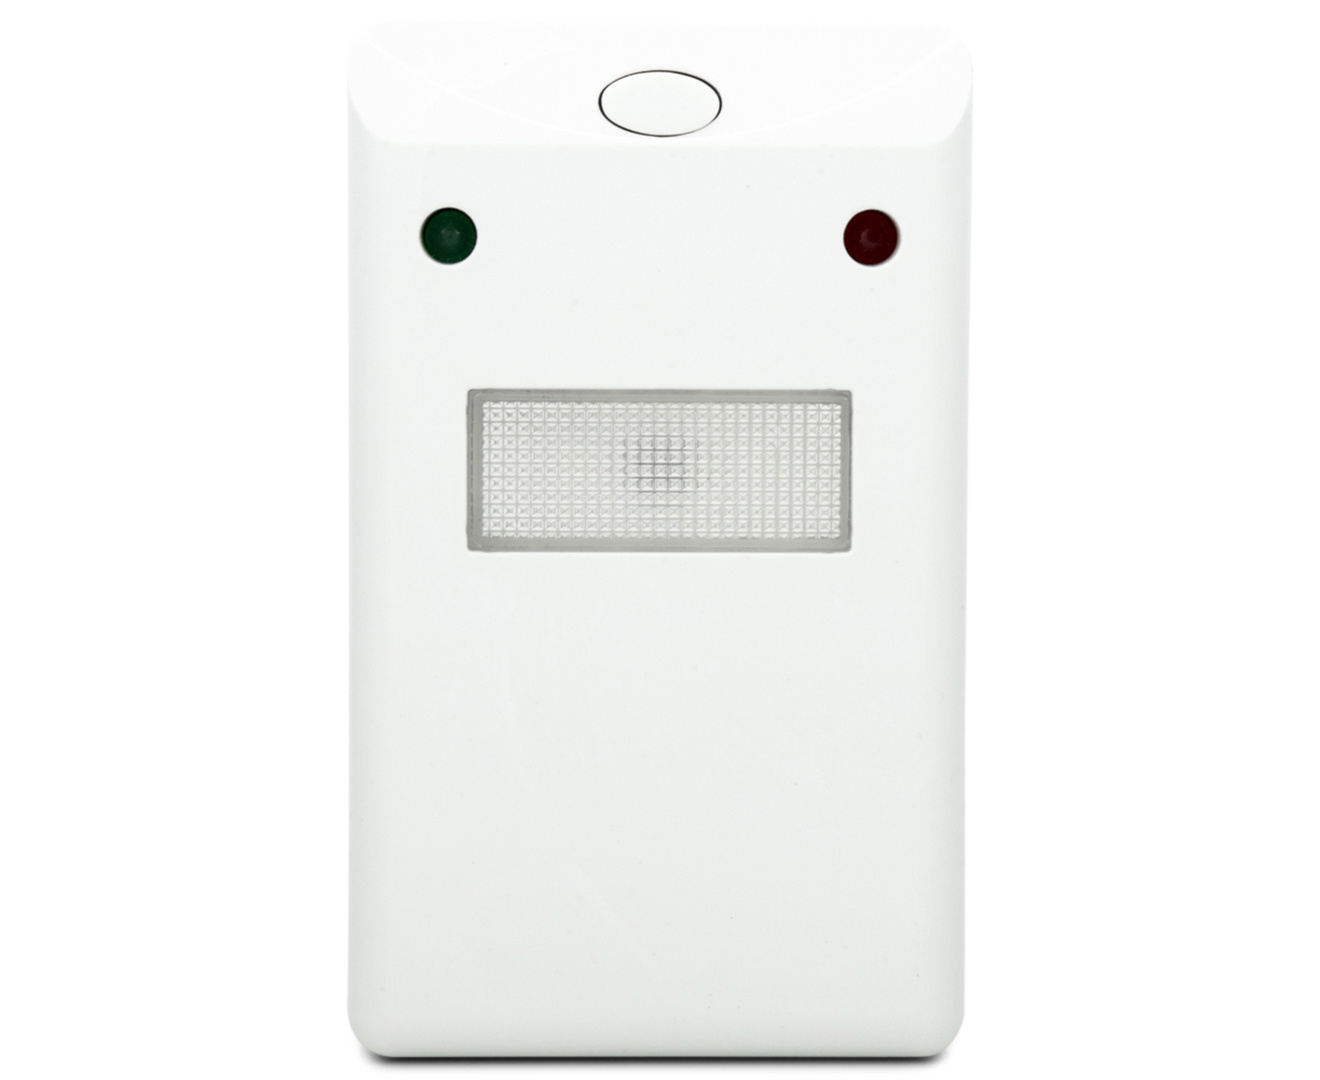 greenlund 4 in 1 ultrasonic pest repeller review